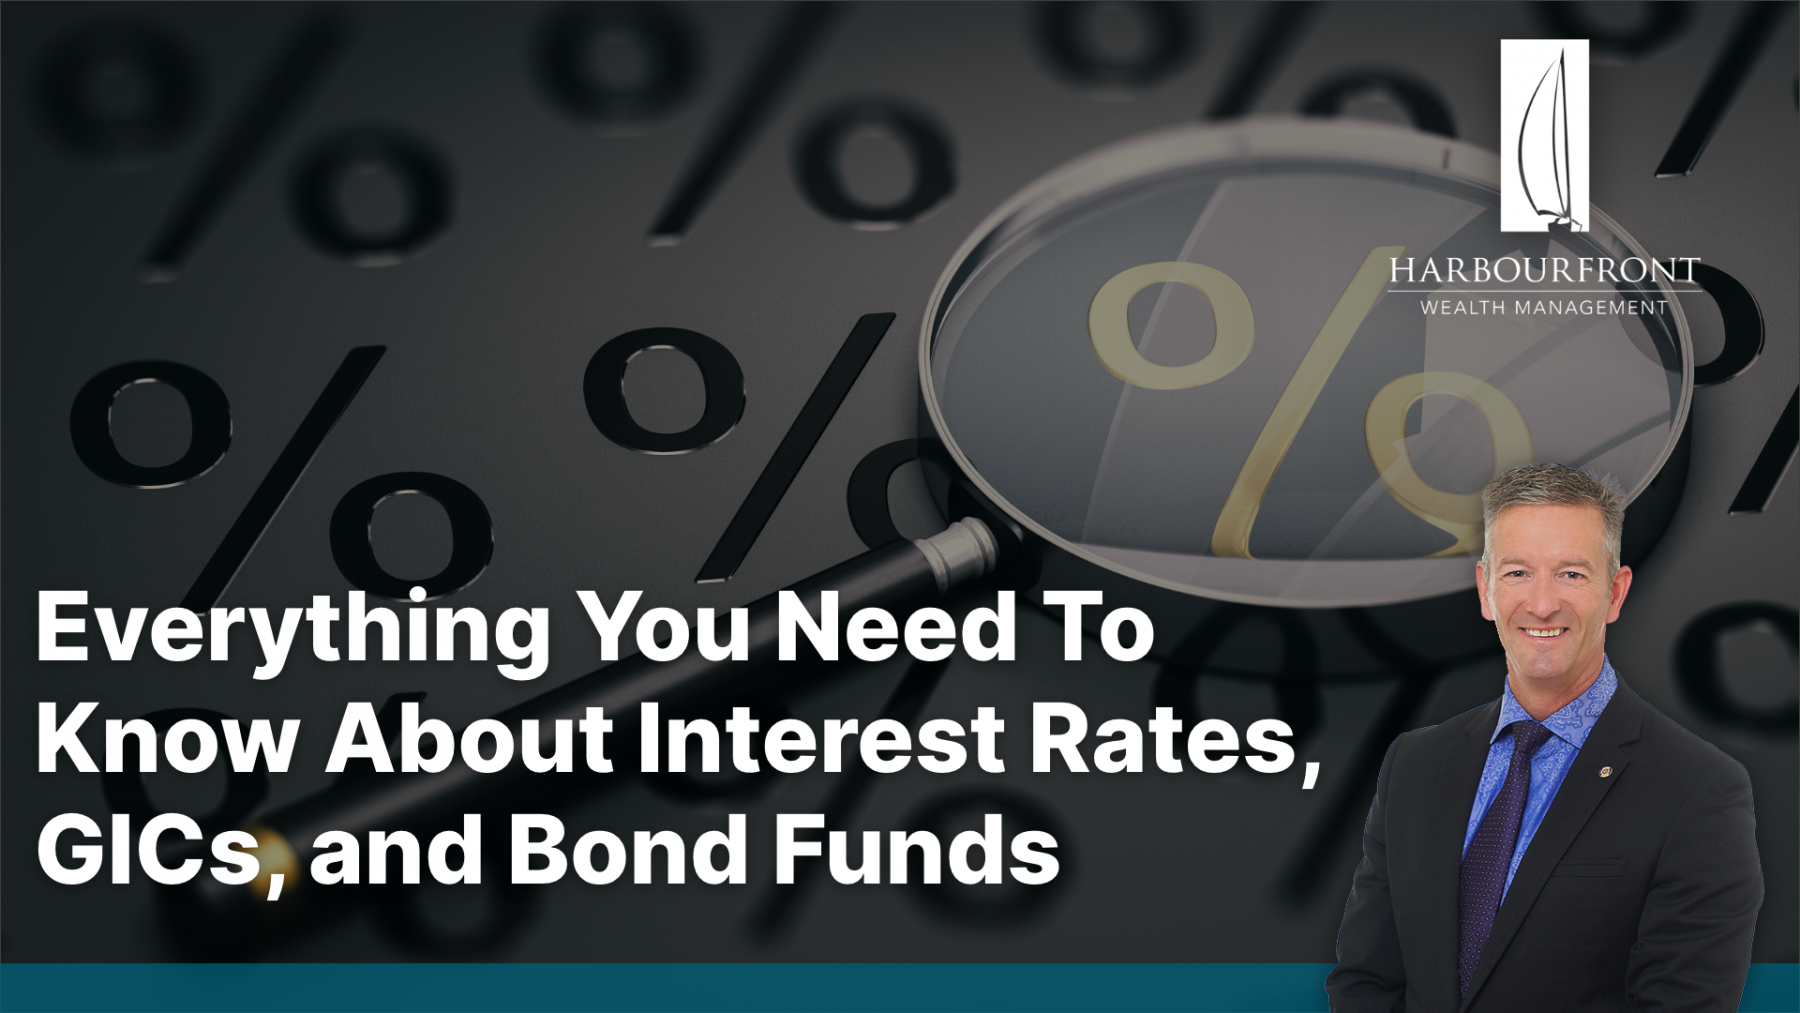 Everything you need to know about interest rates, GICs, and bond funds.